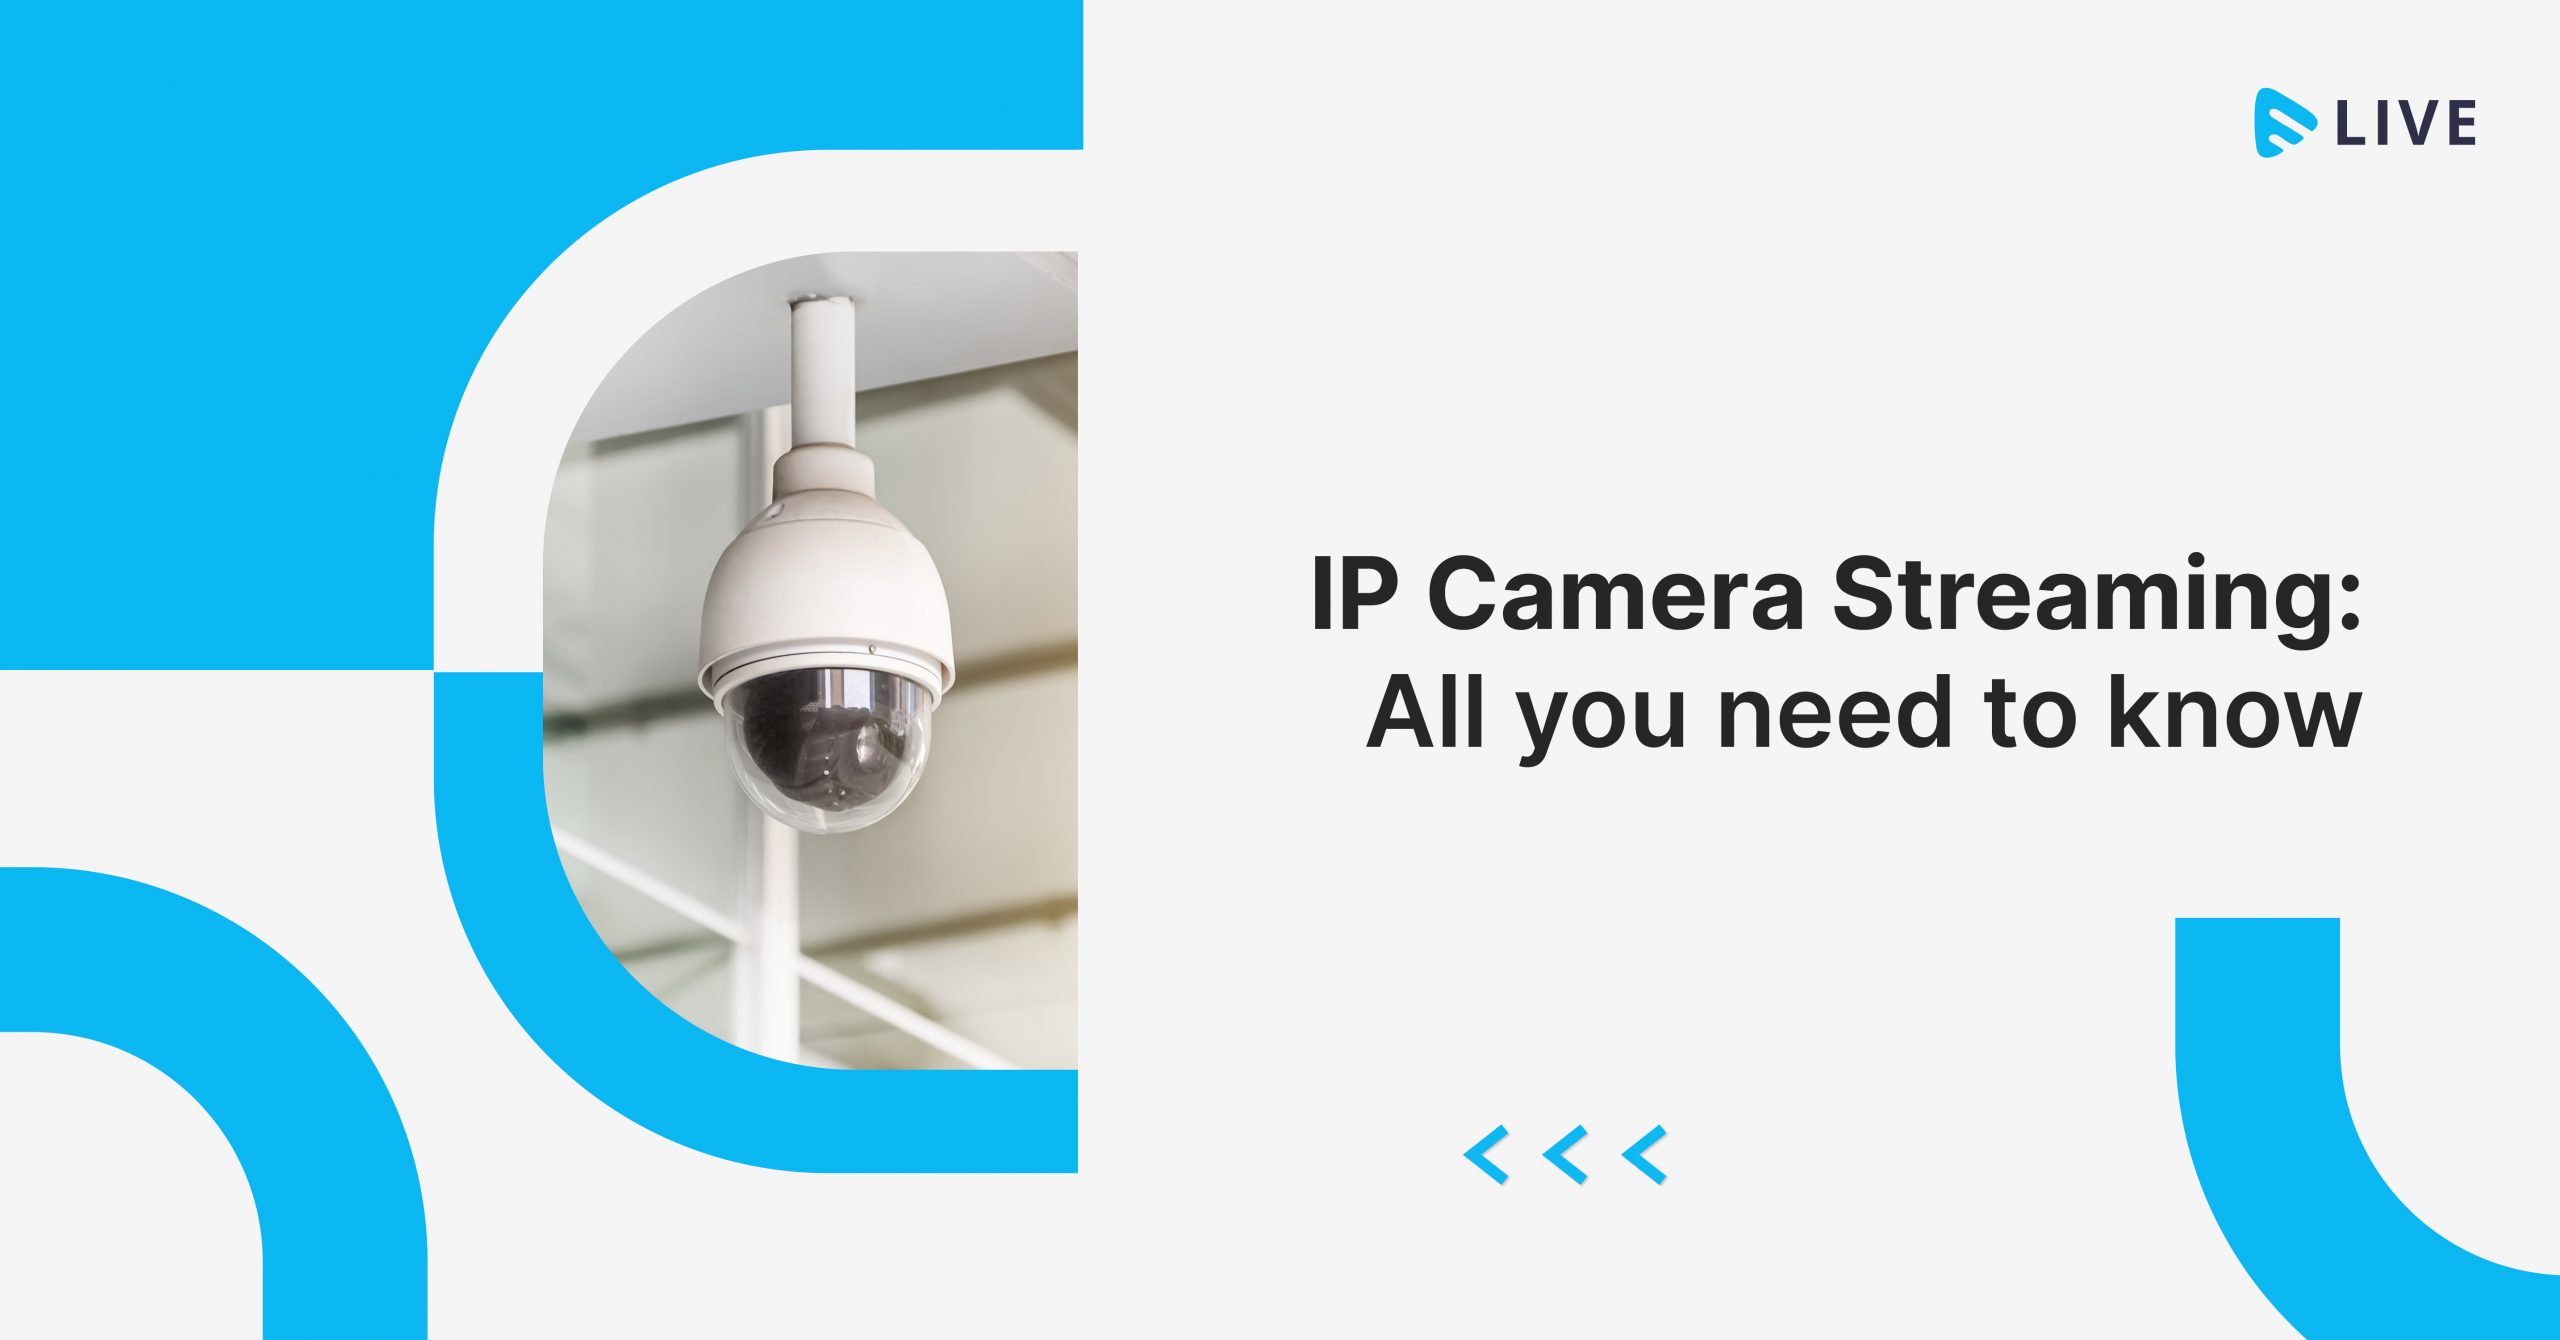 IP Camera Streaming: All You Need to Know